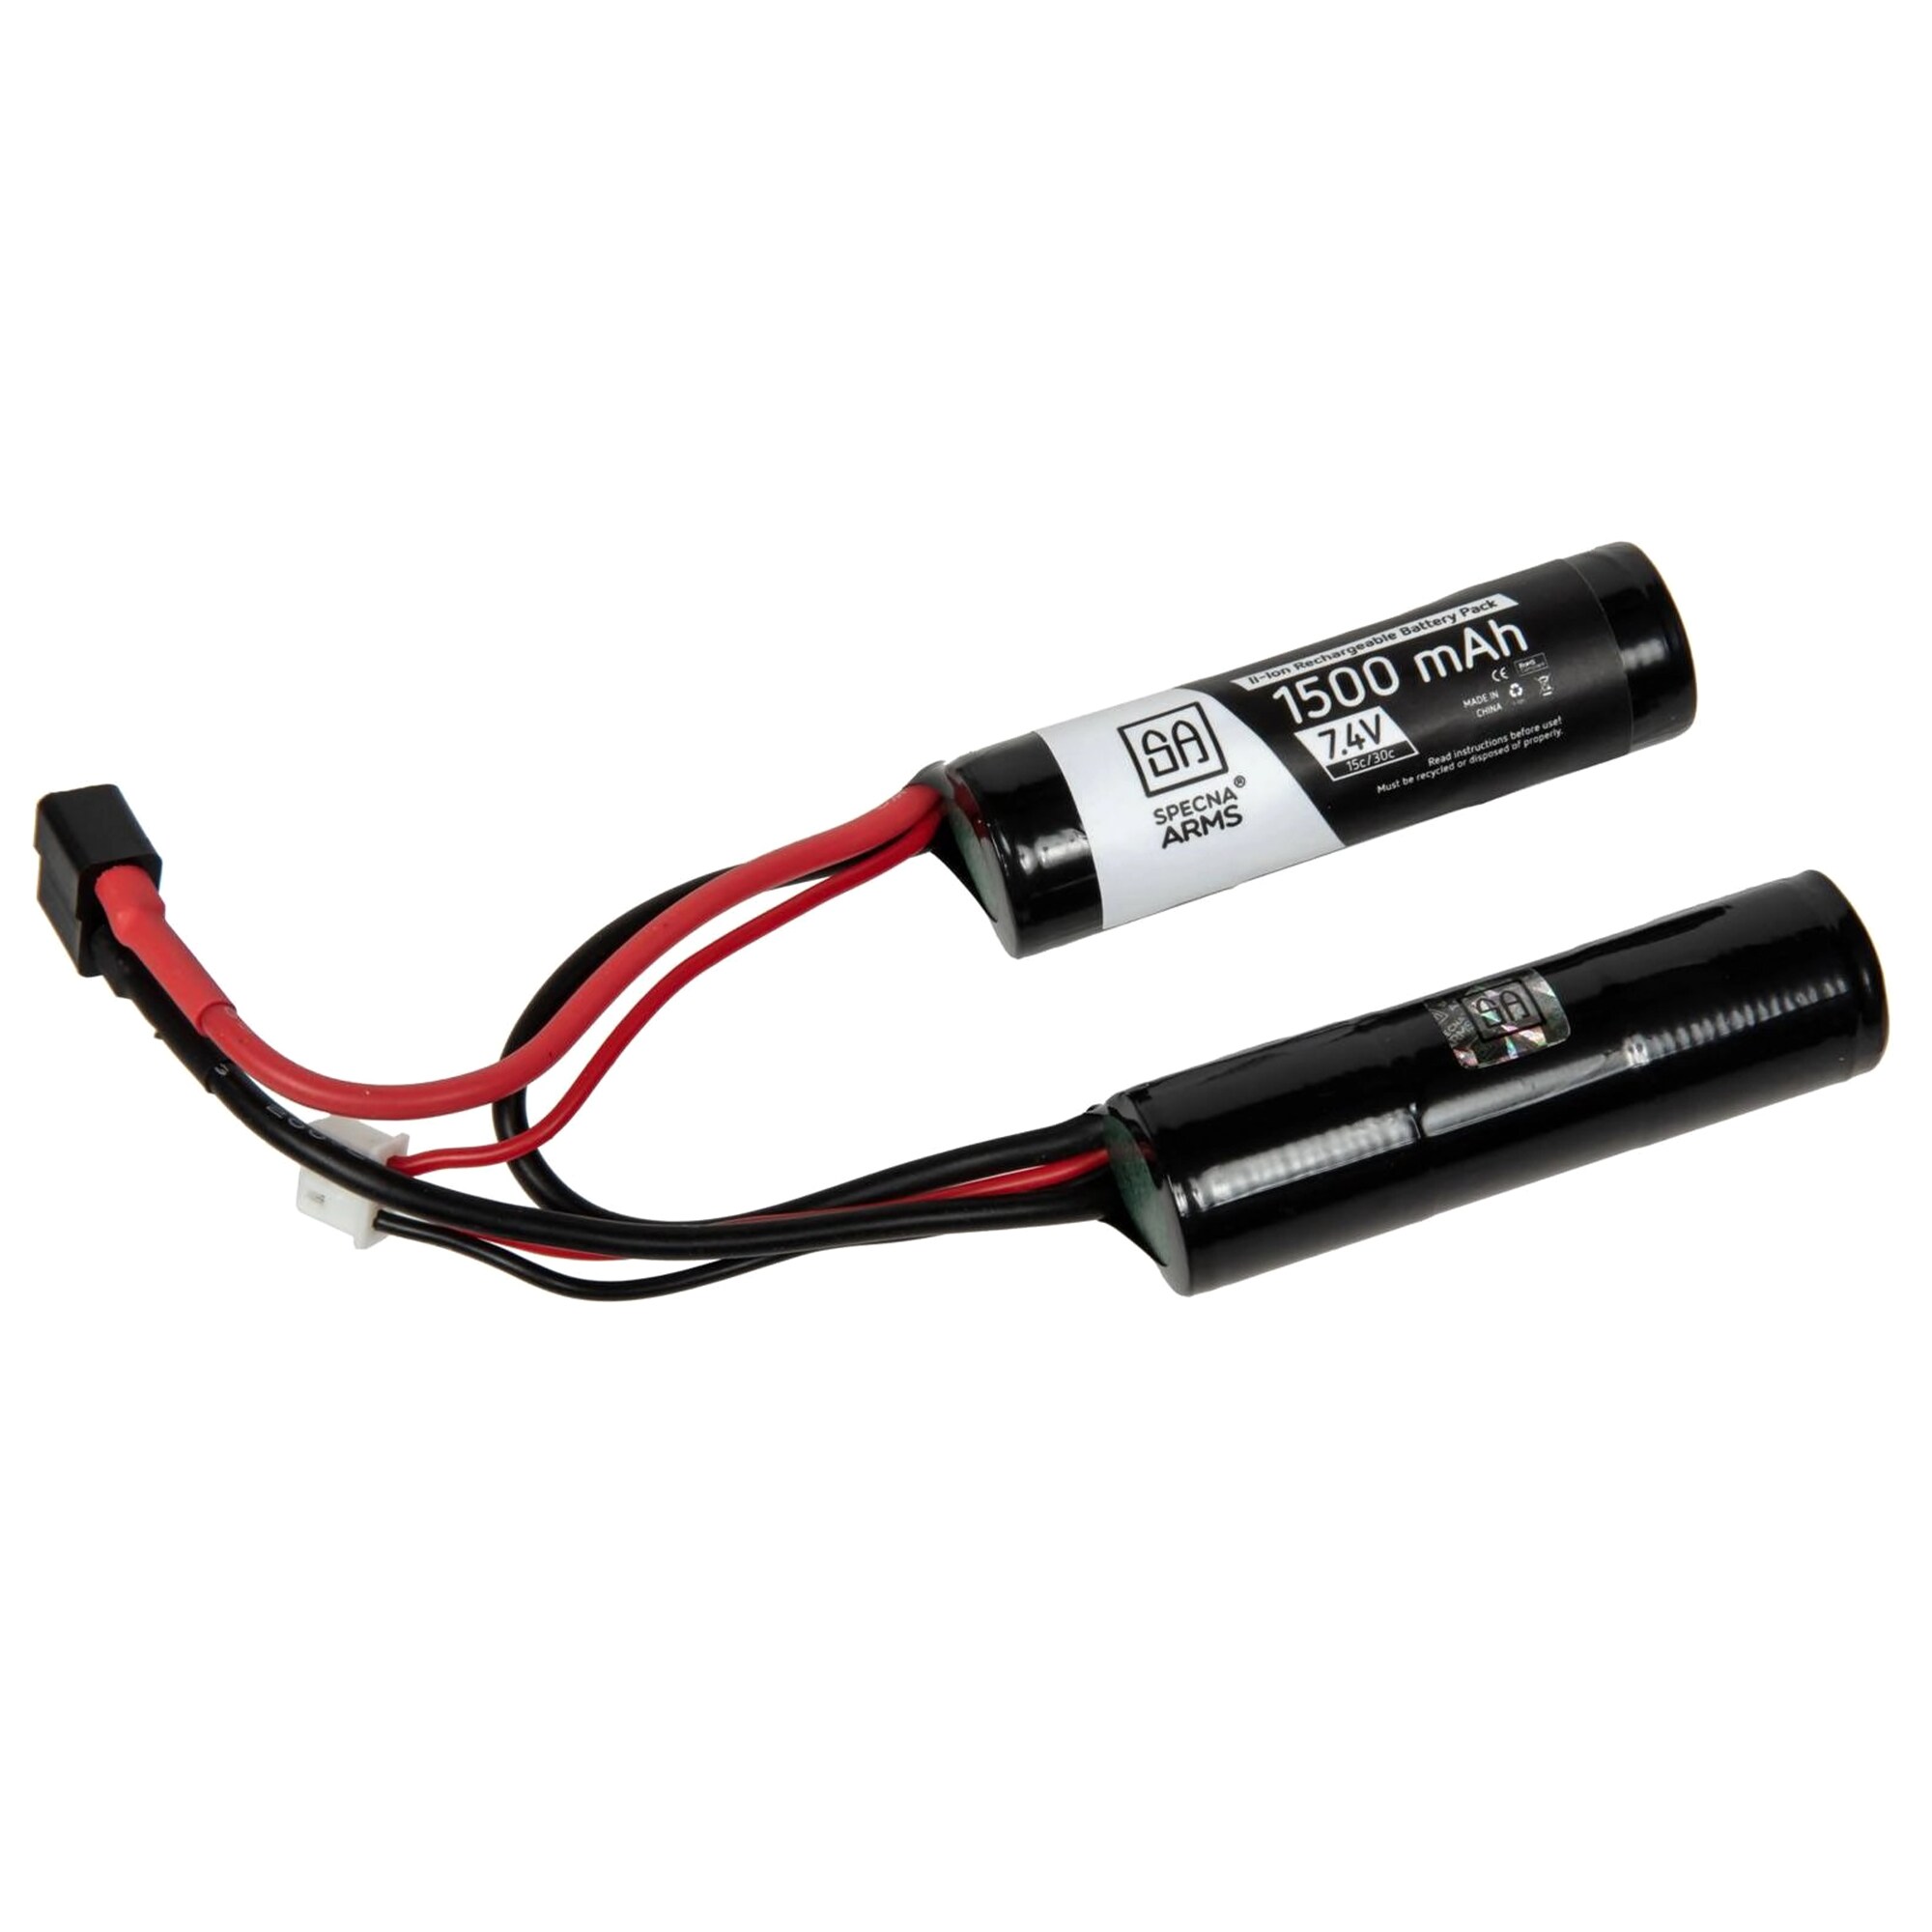 Акумулятор ASG Specna Arms DuoStick 1500 mAh 7,4 V - Deans 